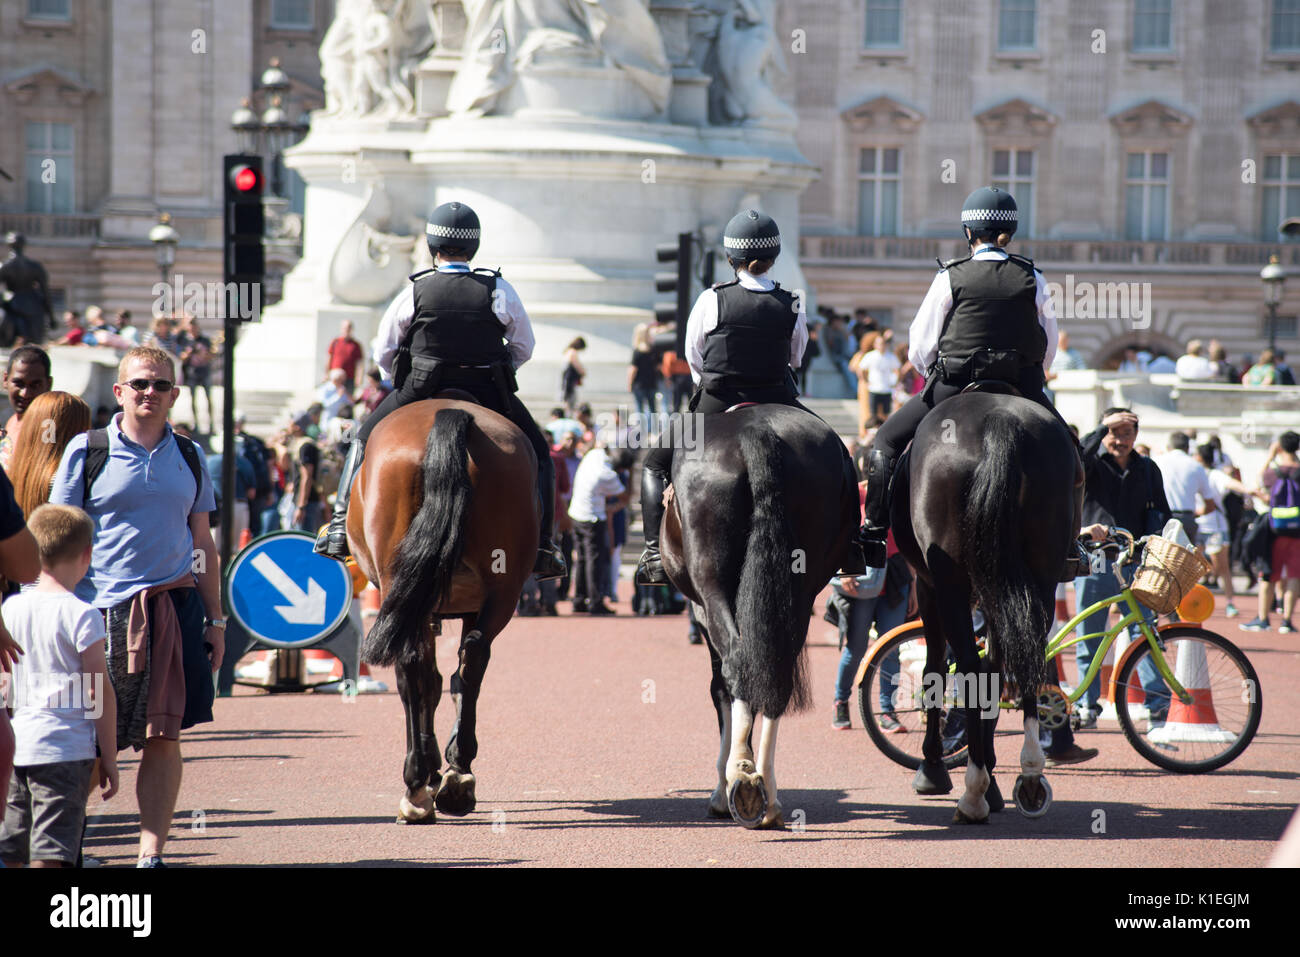 Heightened Security at Buckingham Palace on Saturday and Sunday following the attempted terror attack on Friday 25th August. Tourists watch on as the prescience of mounted police and armed Officers are seen and at Buckingham Palace this past weekend Stock Photo